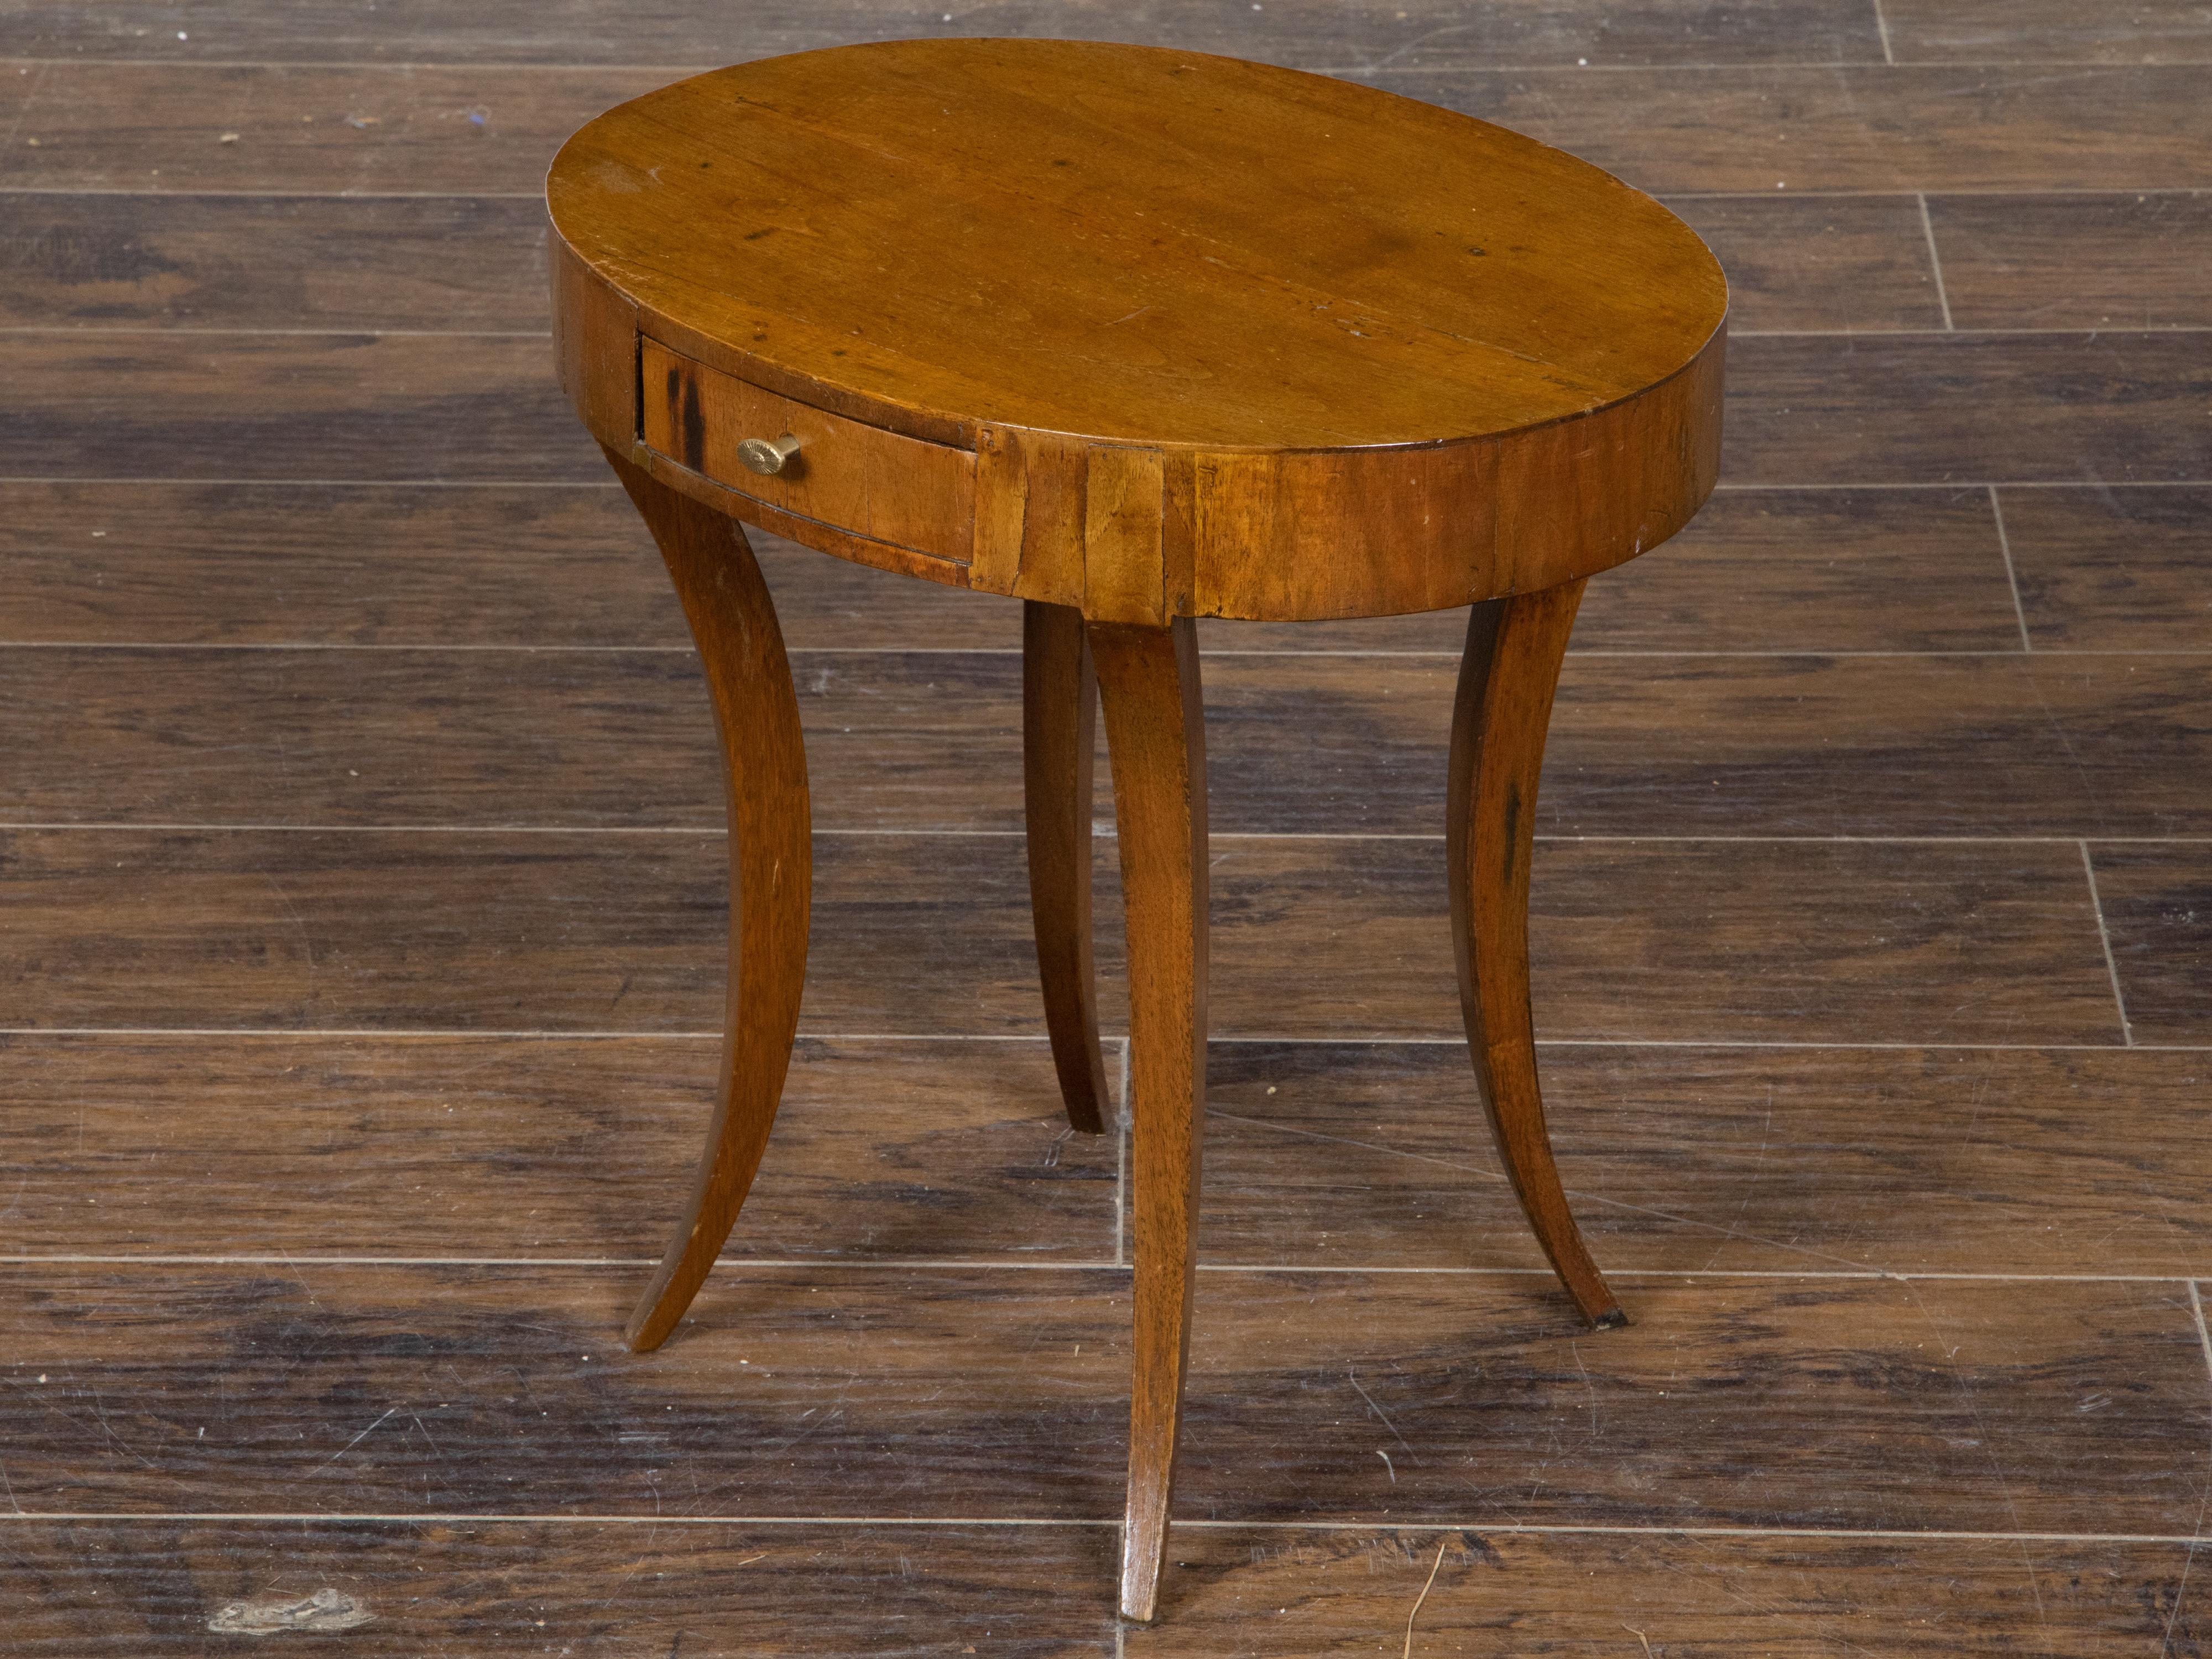 Italian 1810s Neoclassical Walnut Table with Oval Top, Drawer and Saber Legs For Sale 3